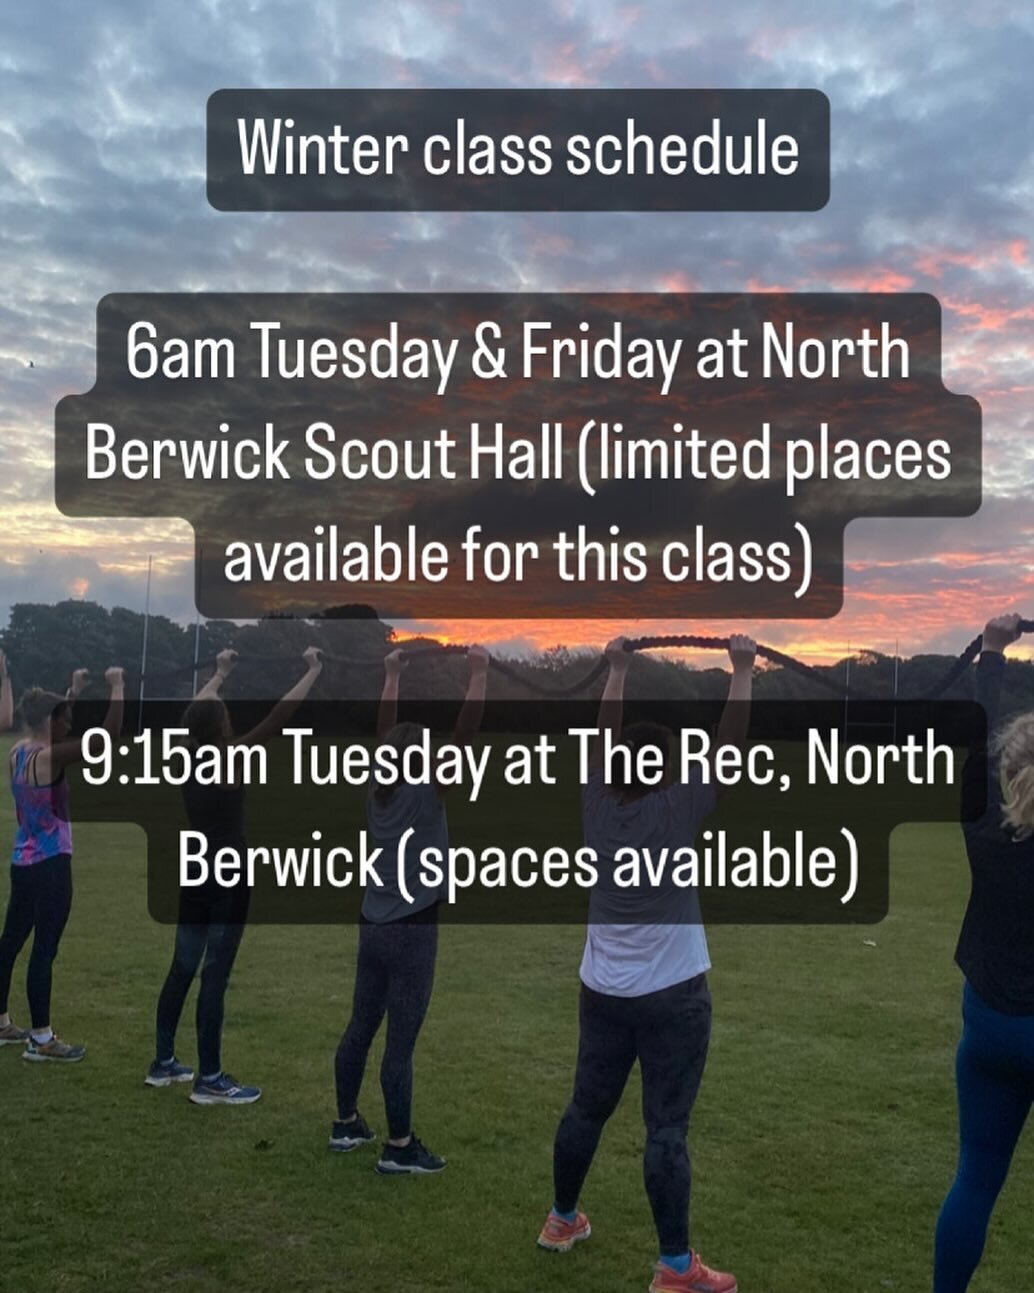 ⭐️Winter Class Schedule⭐️

Come join my classes for fun, community, support, accountability, chat and of course strength and cardio training. 

Cost is &pound;8.50 per session drop in, &pound;40.00 for 5 class pass and &pound;70 for 10 class pass.

B